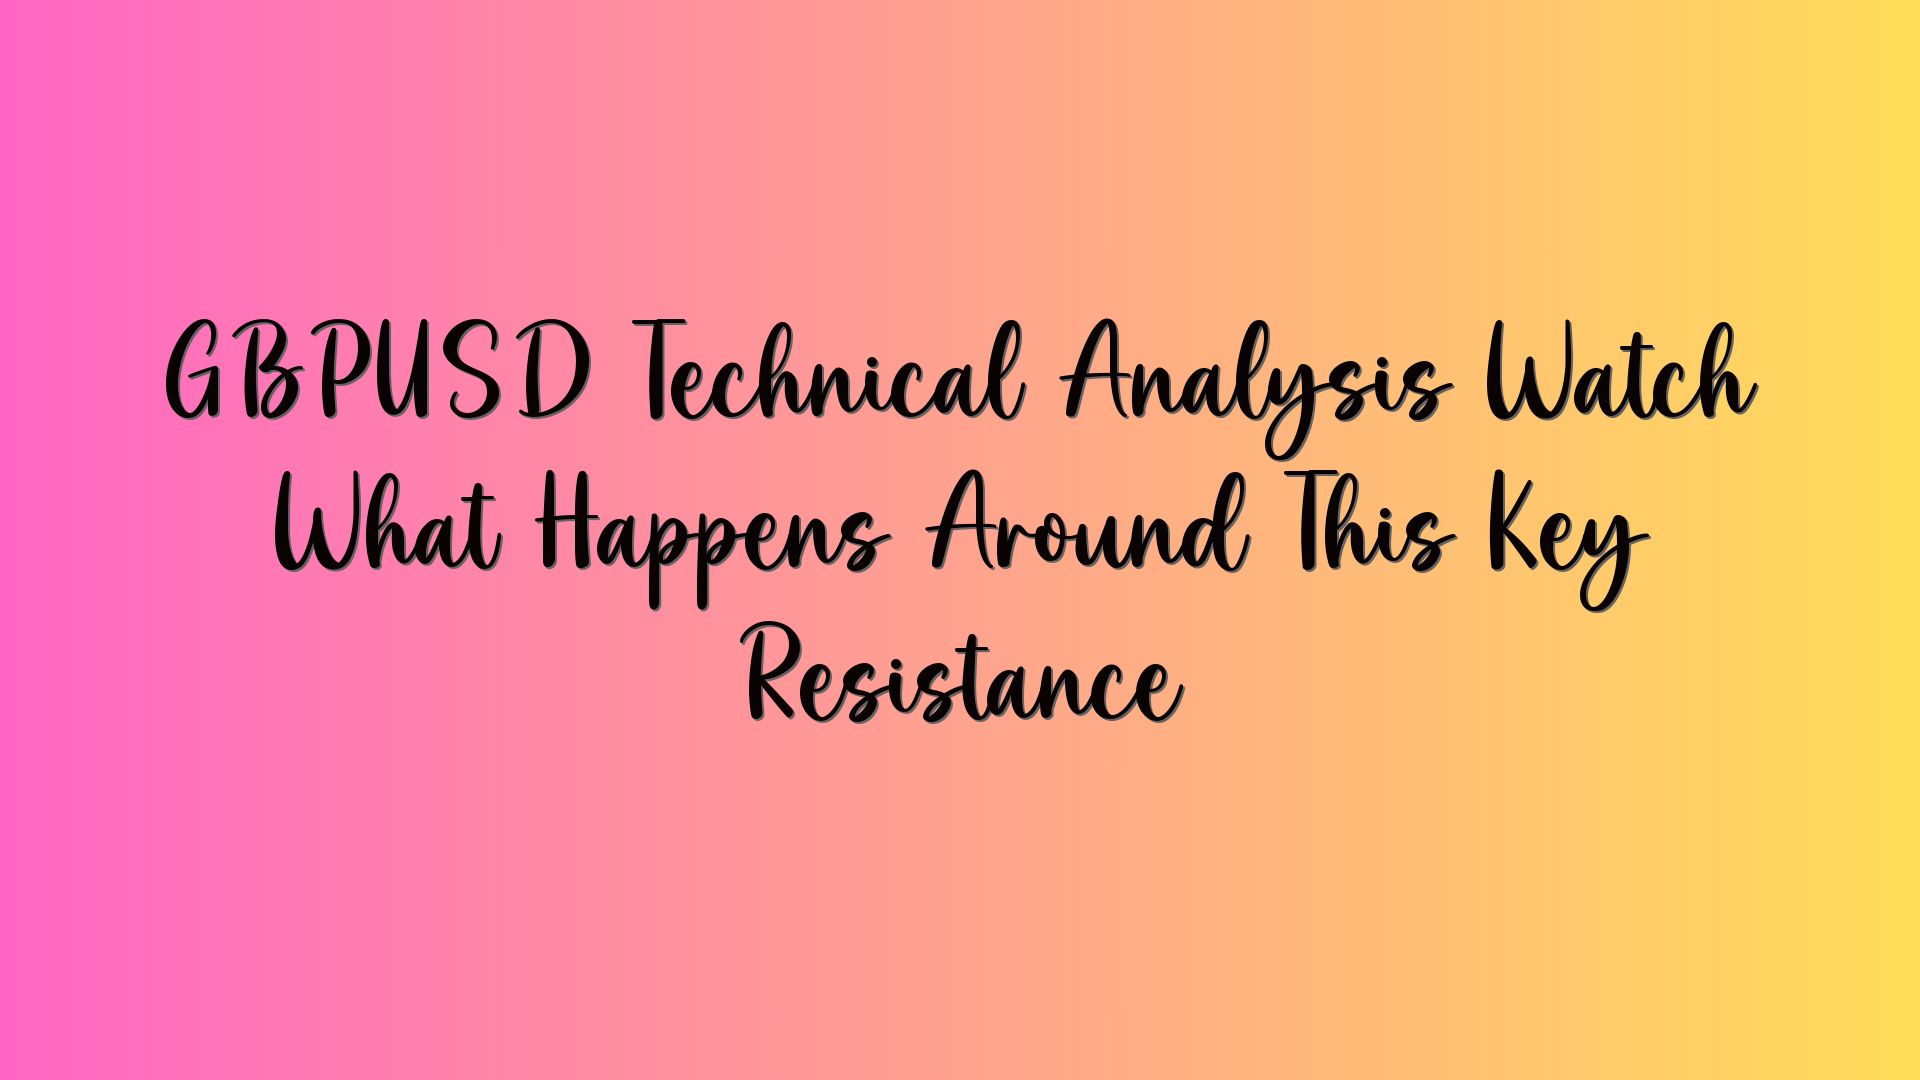 GBPUSD Technical Analysis Watch What Happens Around This Key Resistance